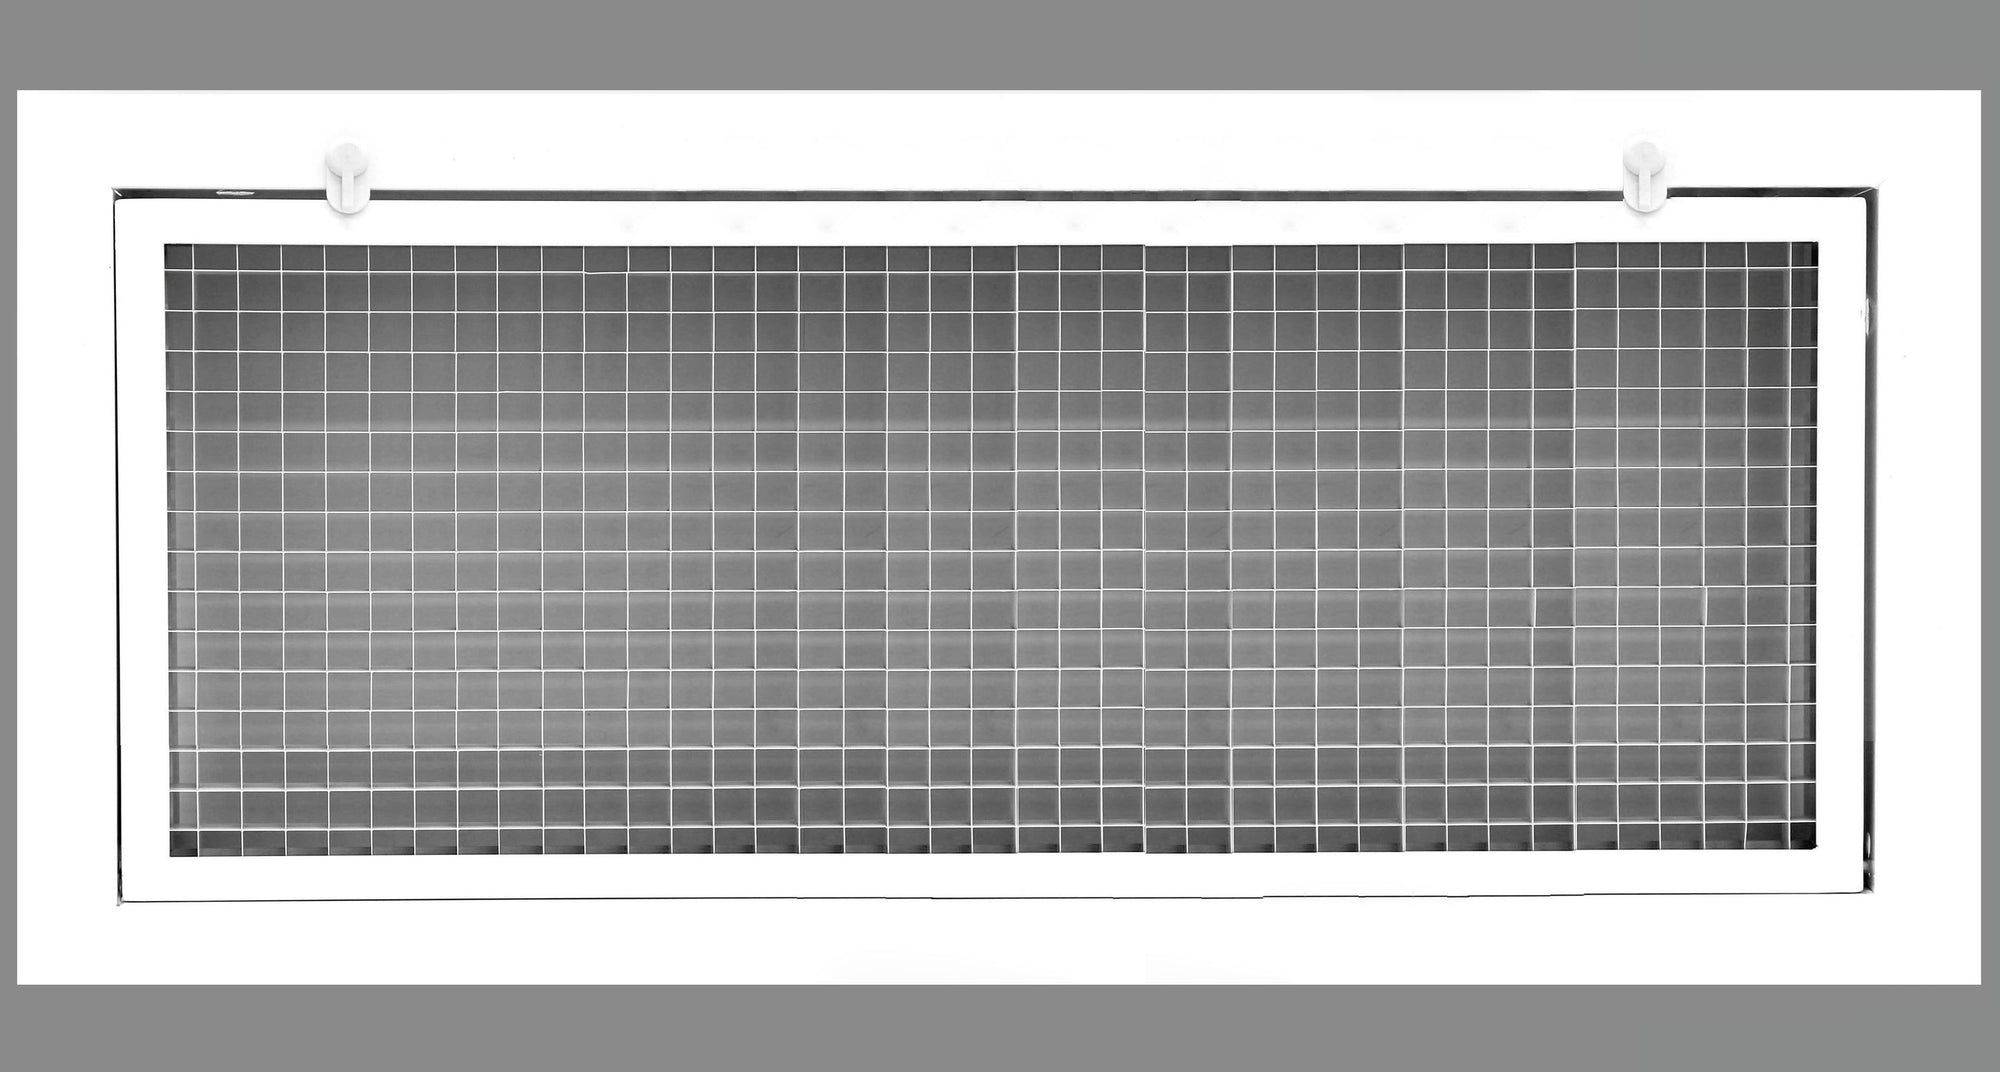 36" x 16" Cube Core Eggcrate Return Air Filter Grille for 1" Filter